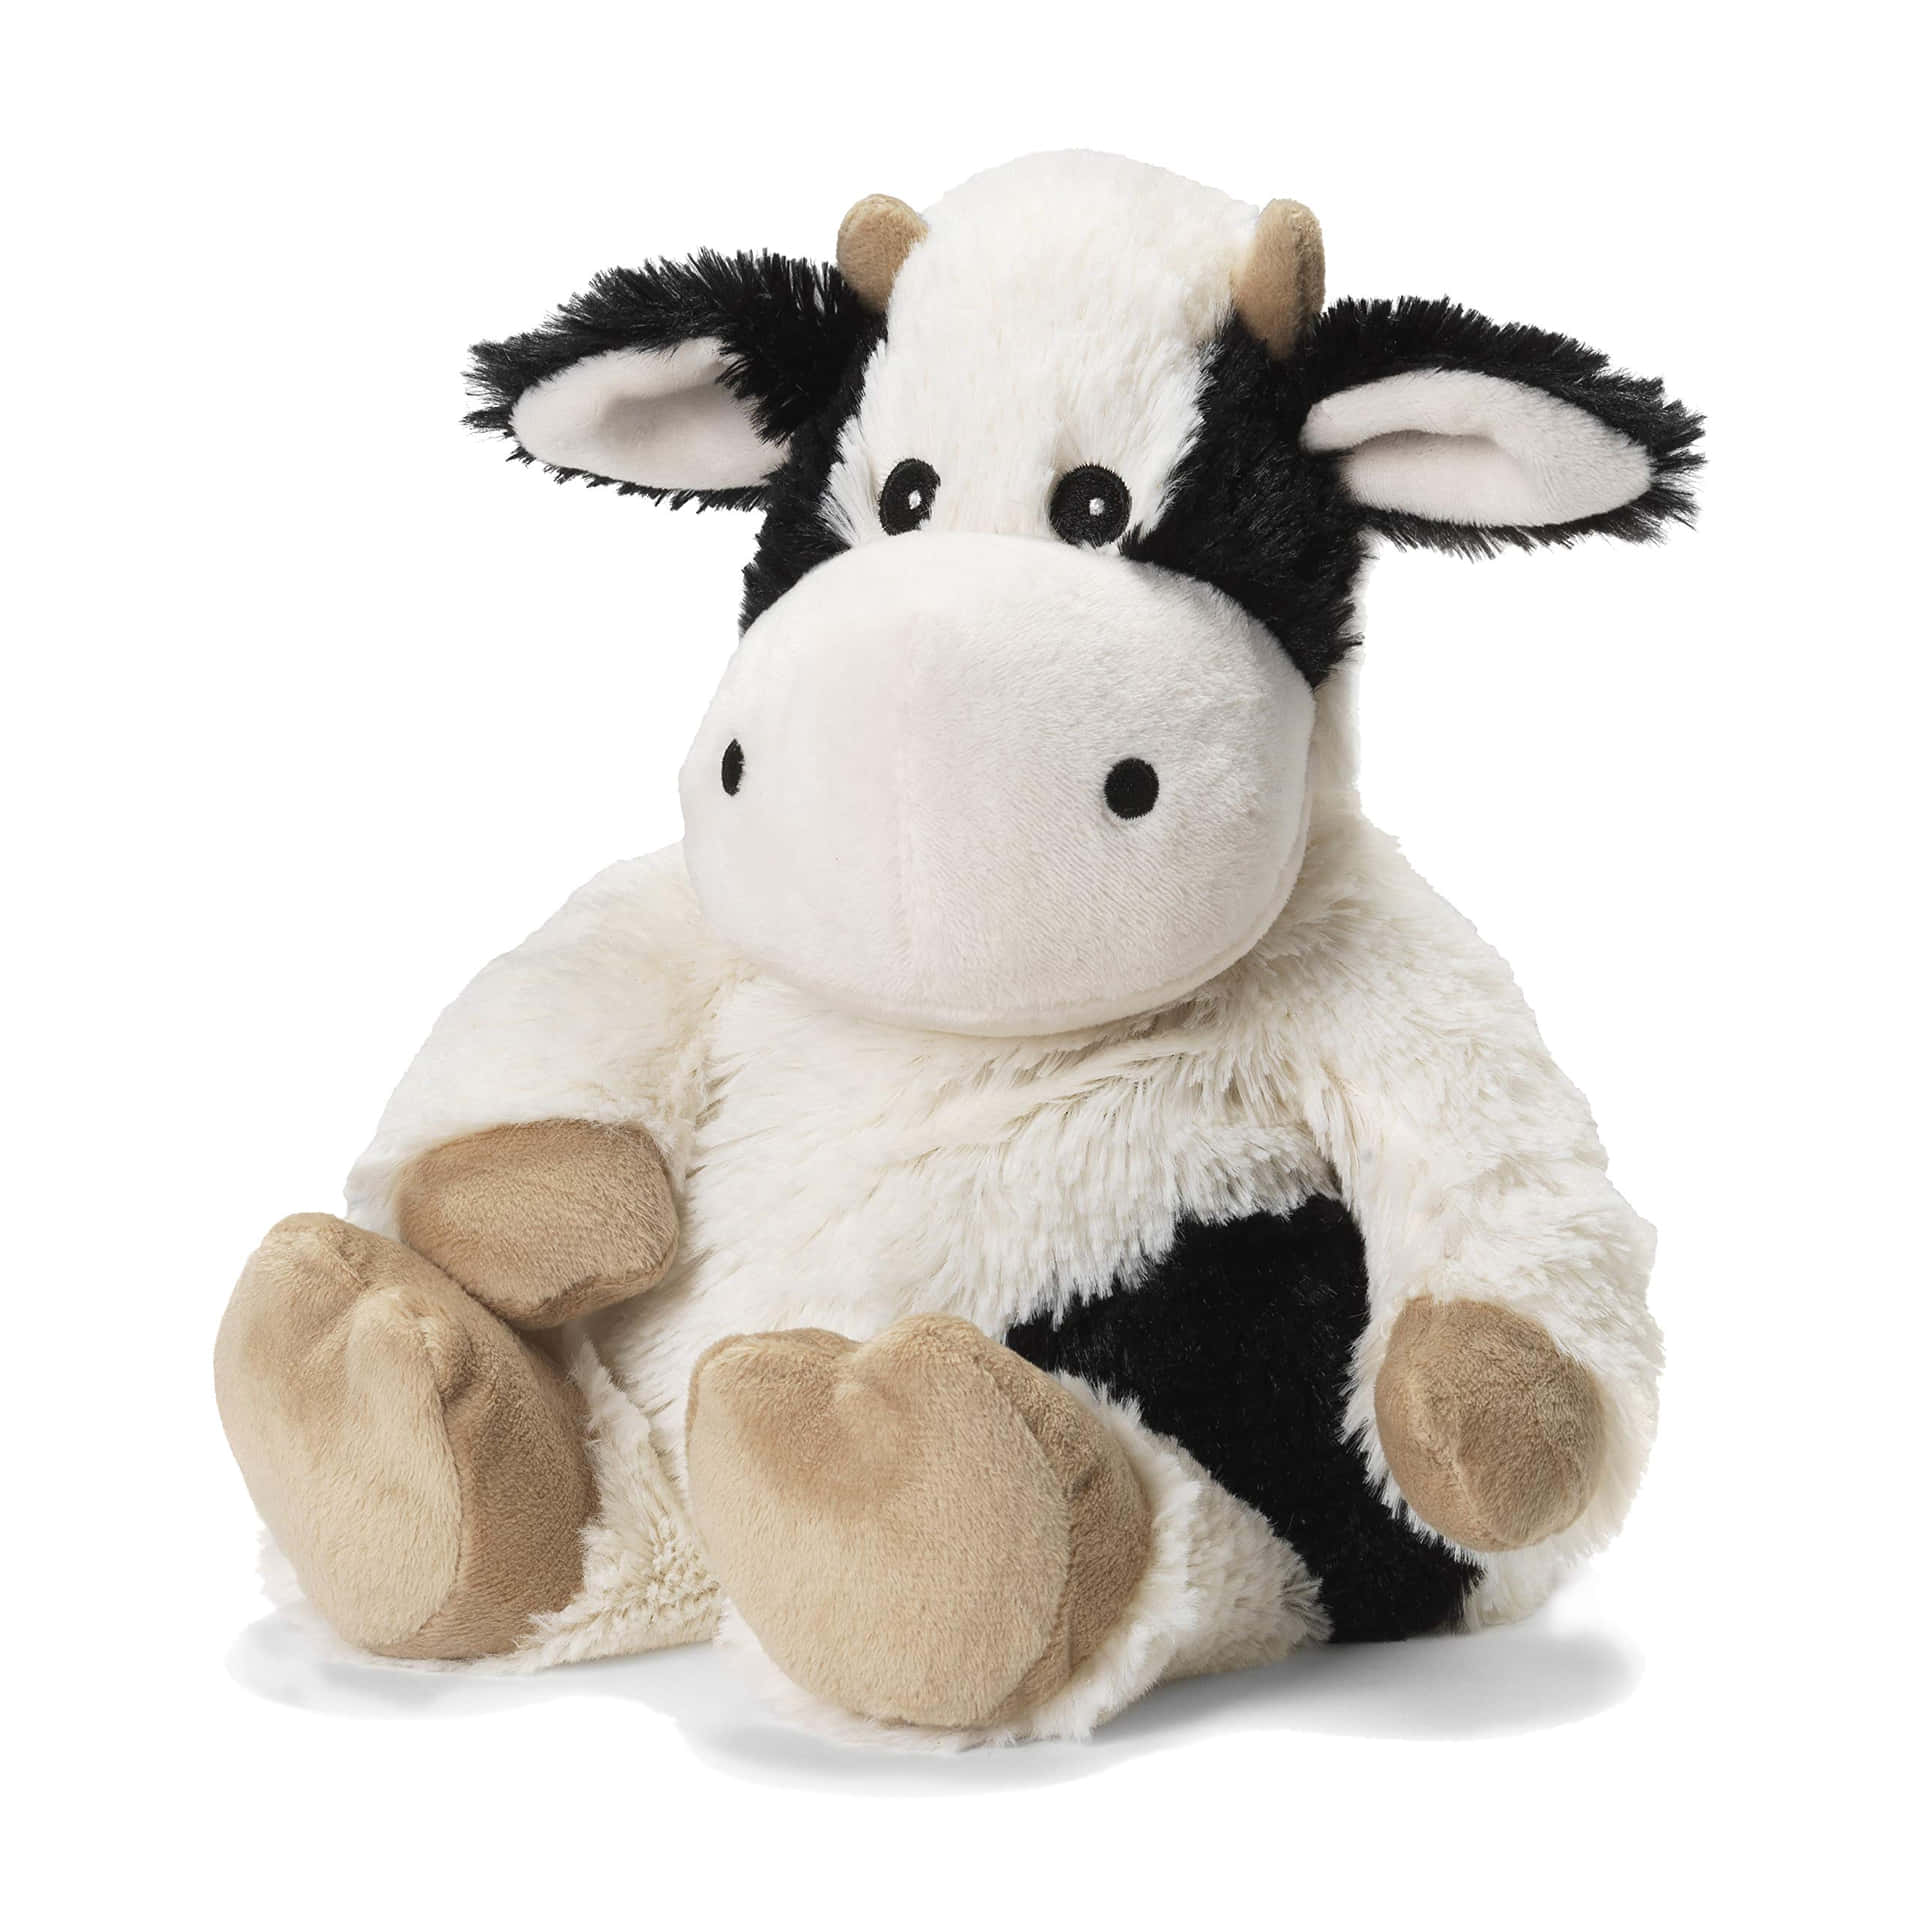 A Stuffed Cow Sitting On A White Background